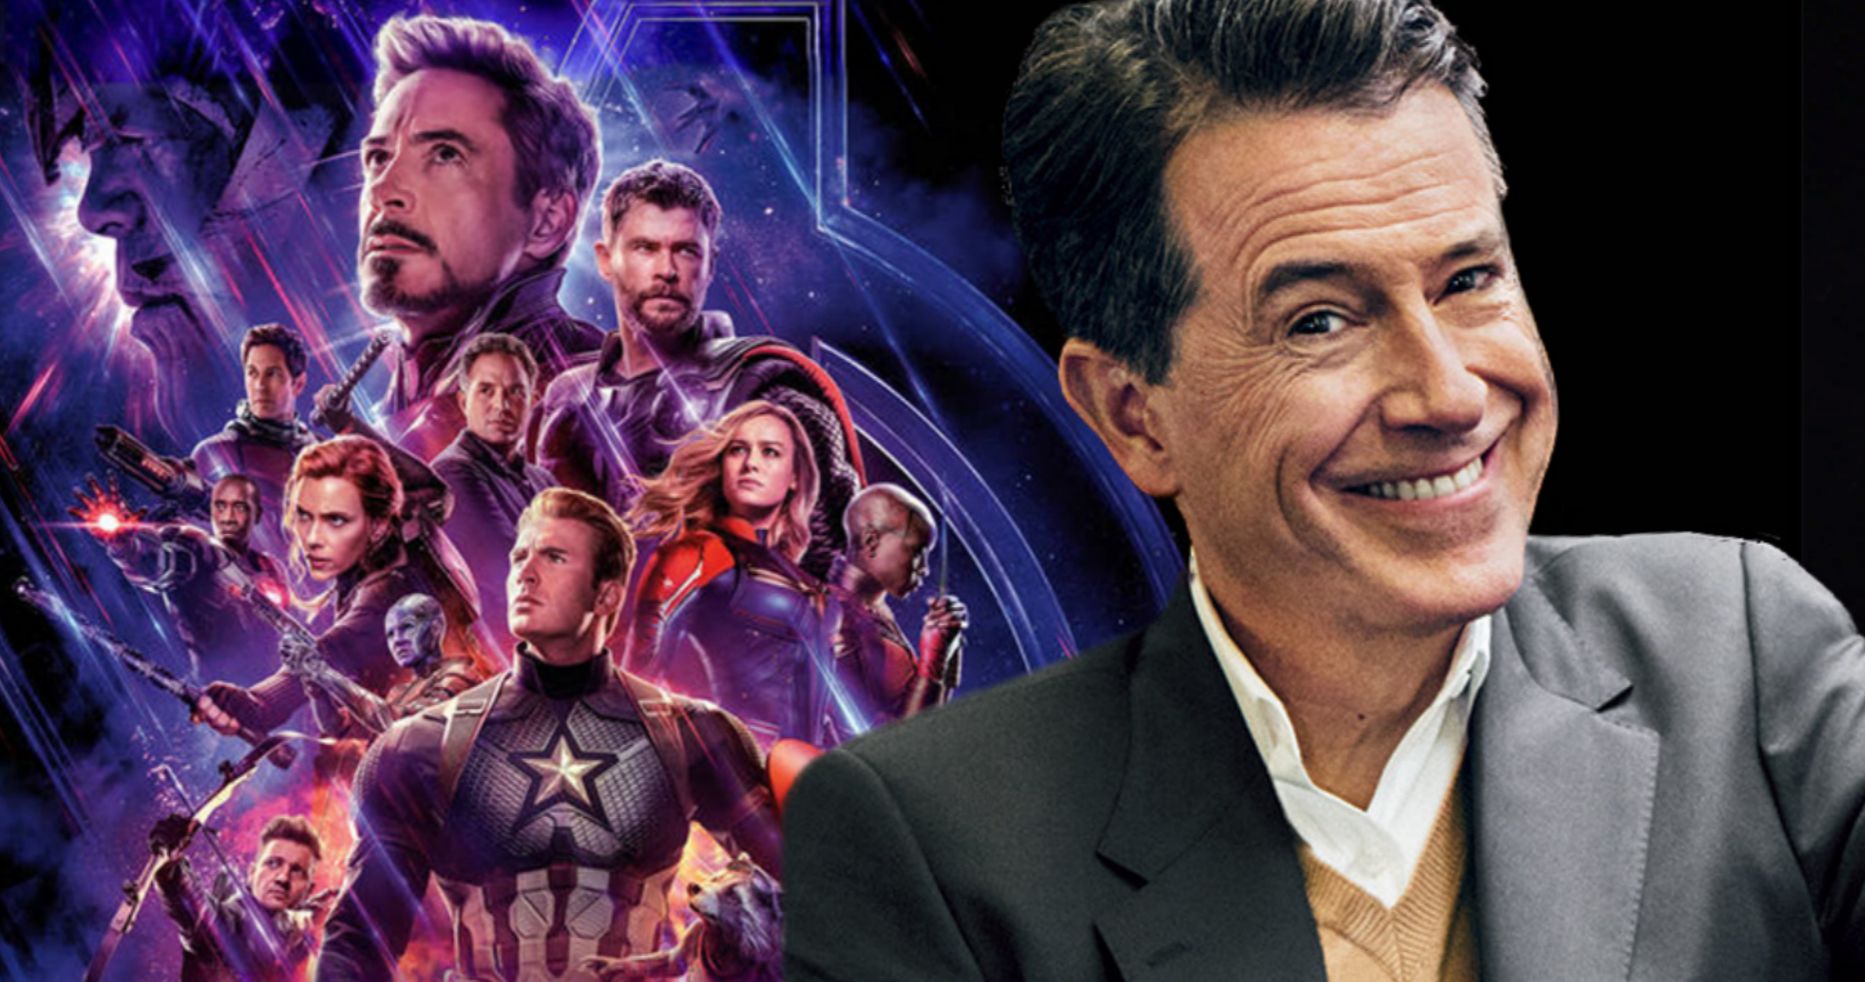 Robert Downey Jr. Welcomes Stephen Colbert Into the Avengers with Open Arms